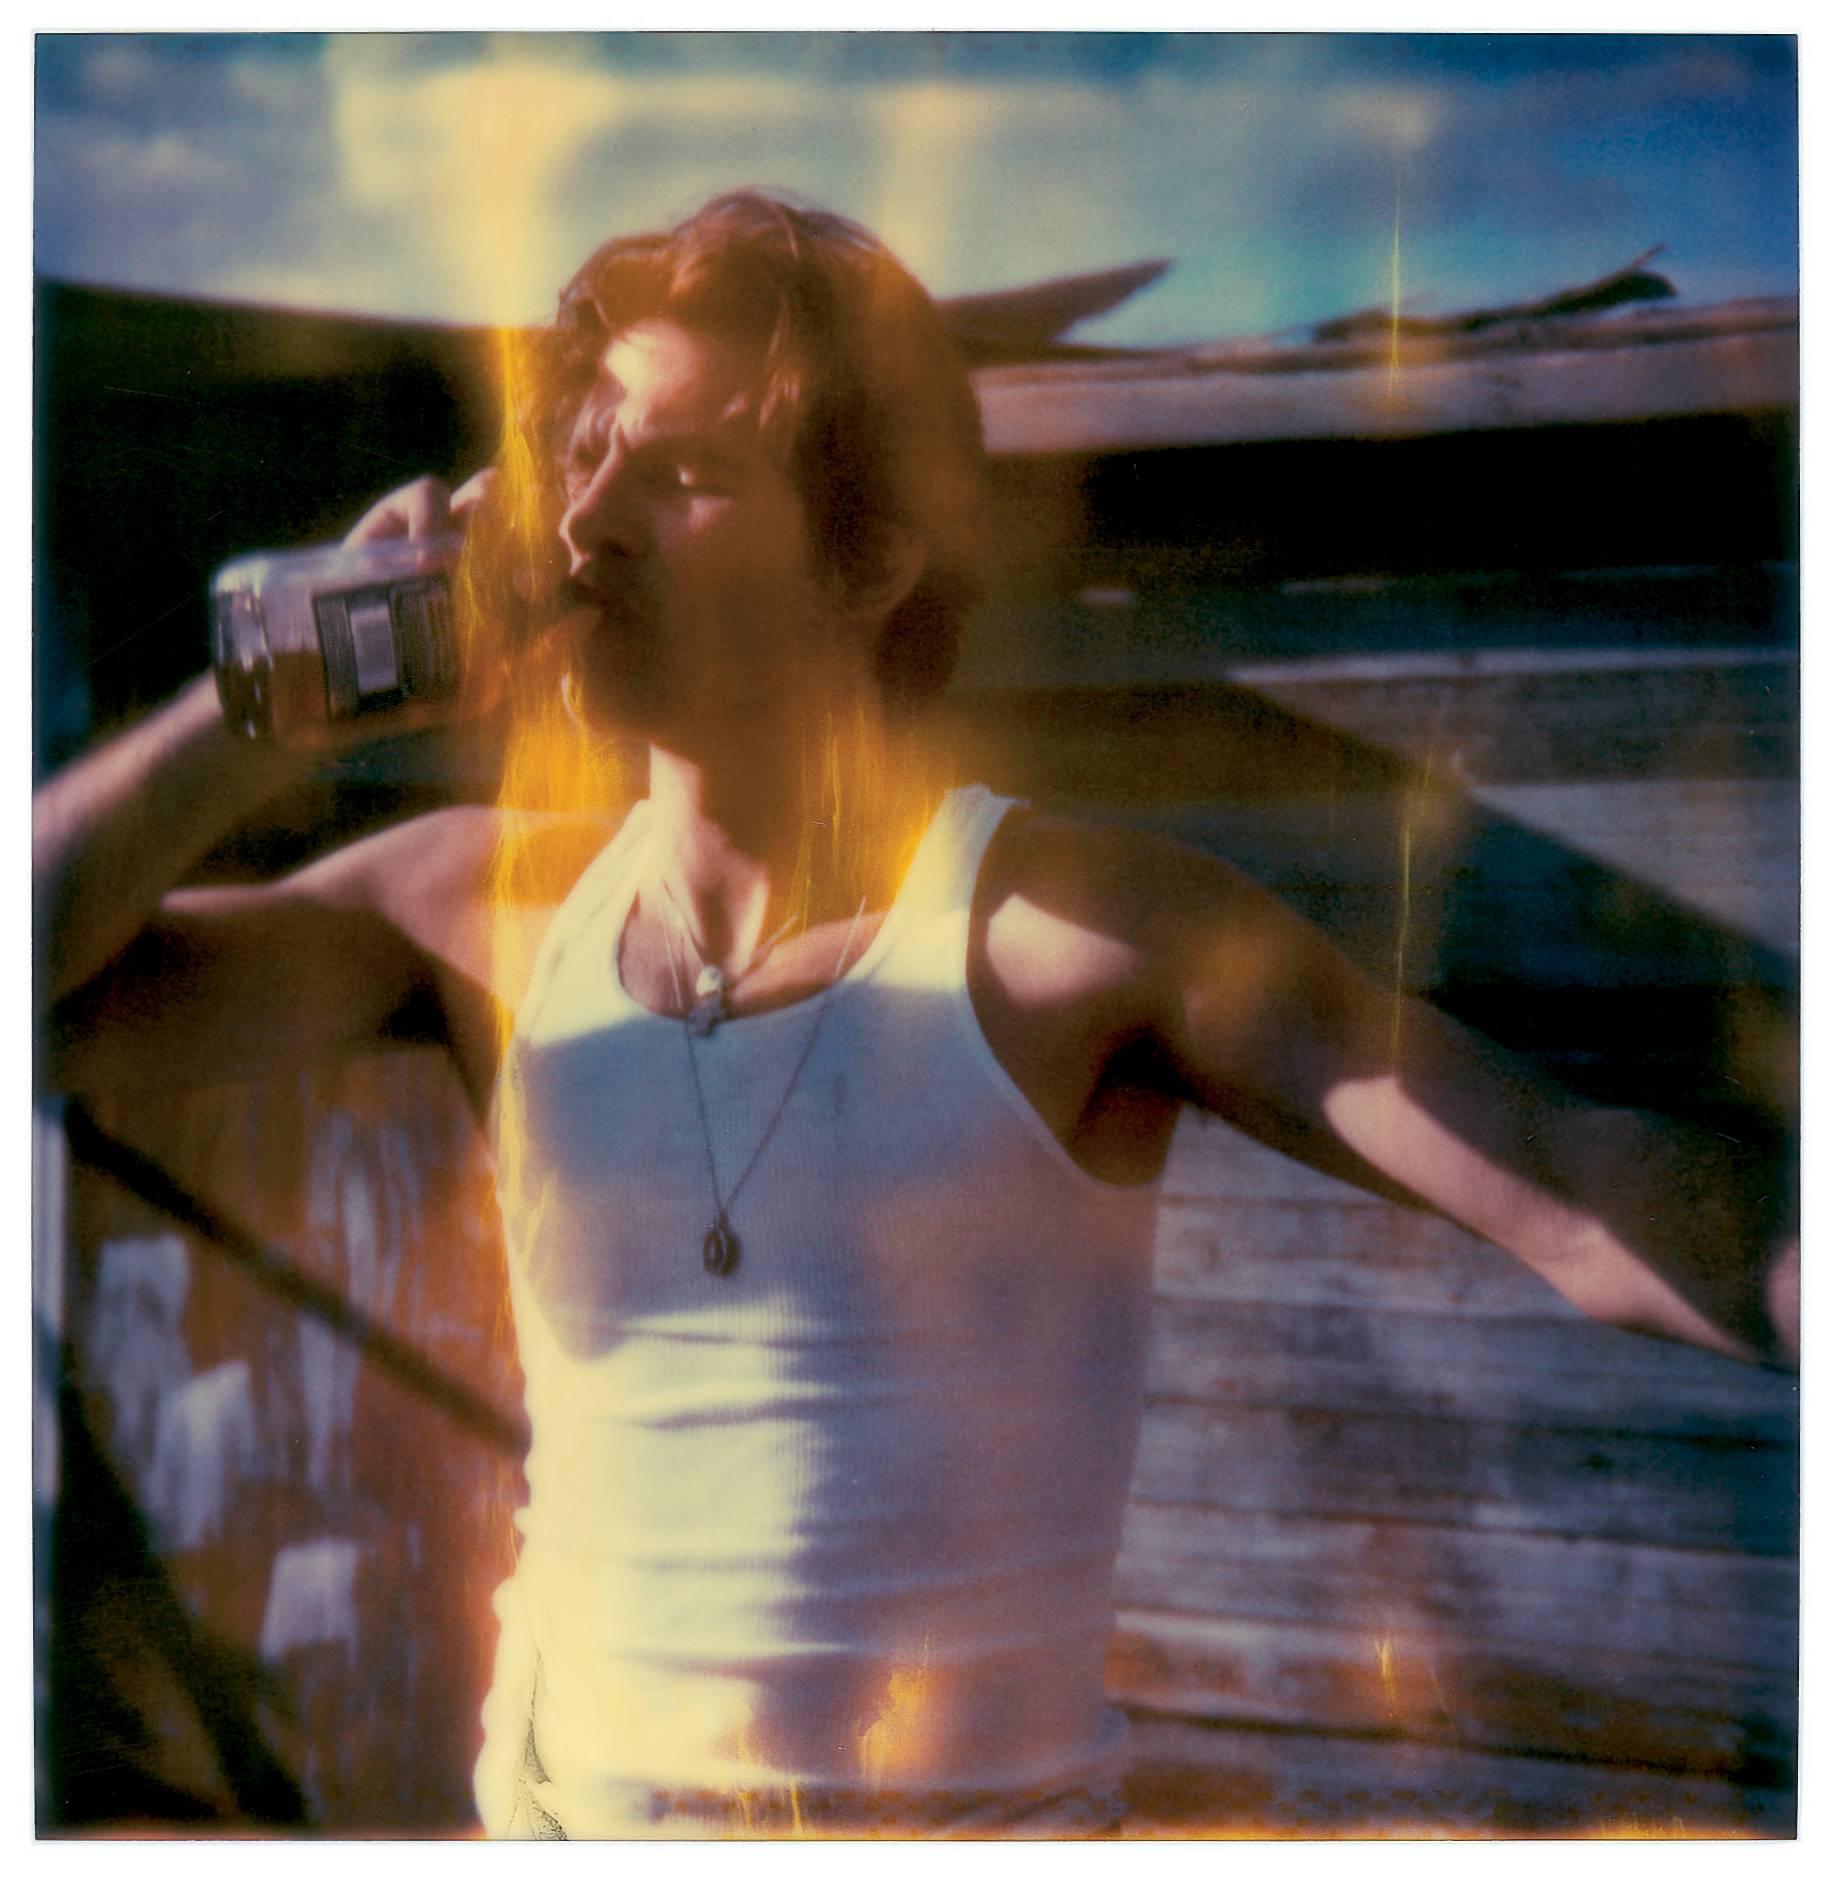 'Whisky Dance I' (Sidewinder), 2005, 8 pieces installed including gaps 172x338cm, 82x80cm, Edition 2/5, 
analog C-Prints, hand-printed by the artist on Fuji Crystal Archive Paper, 
mounted on Aluminum with matte UV-Protection, based on 8 Polaroids,